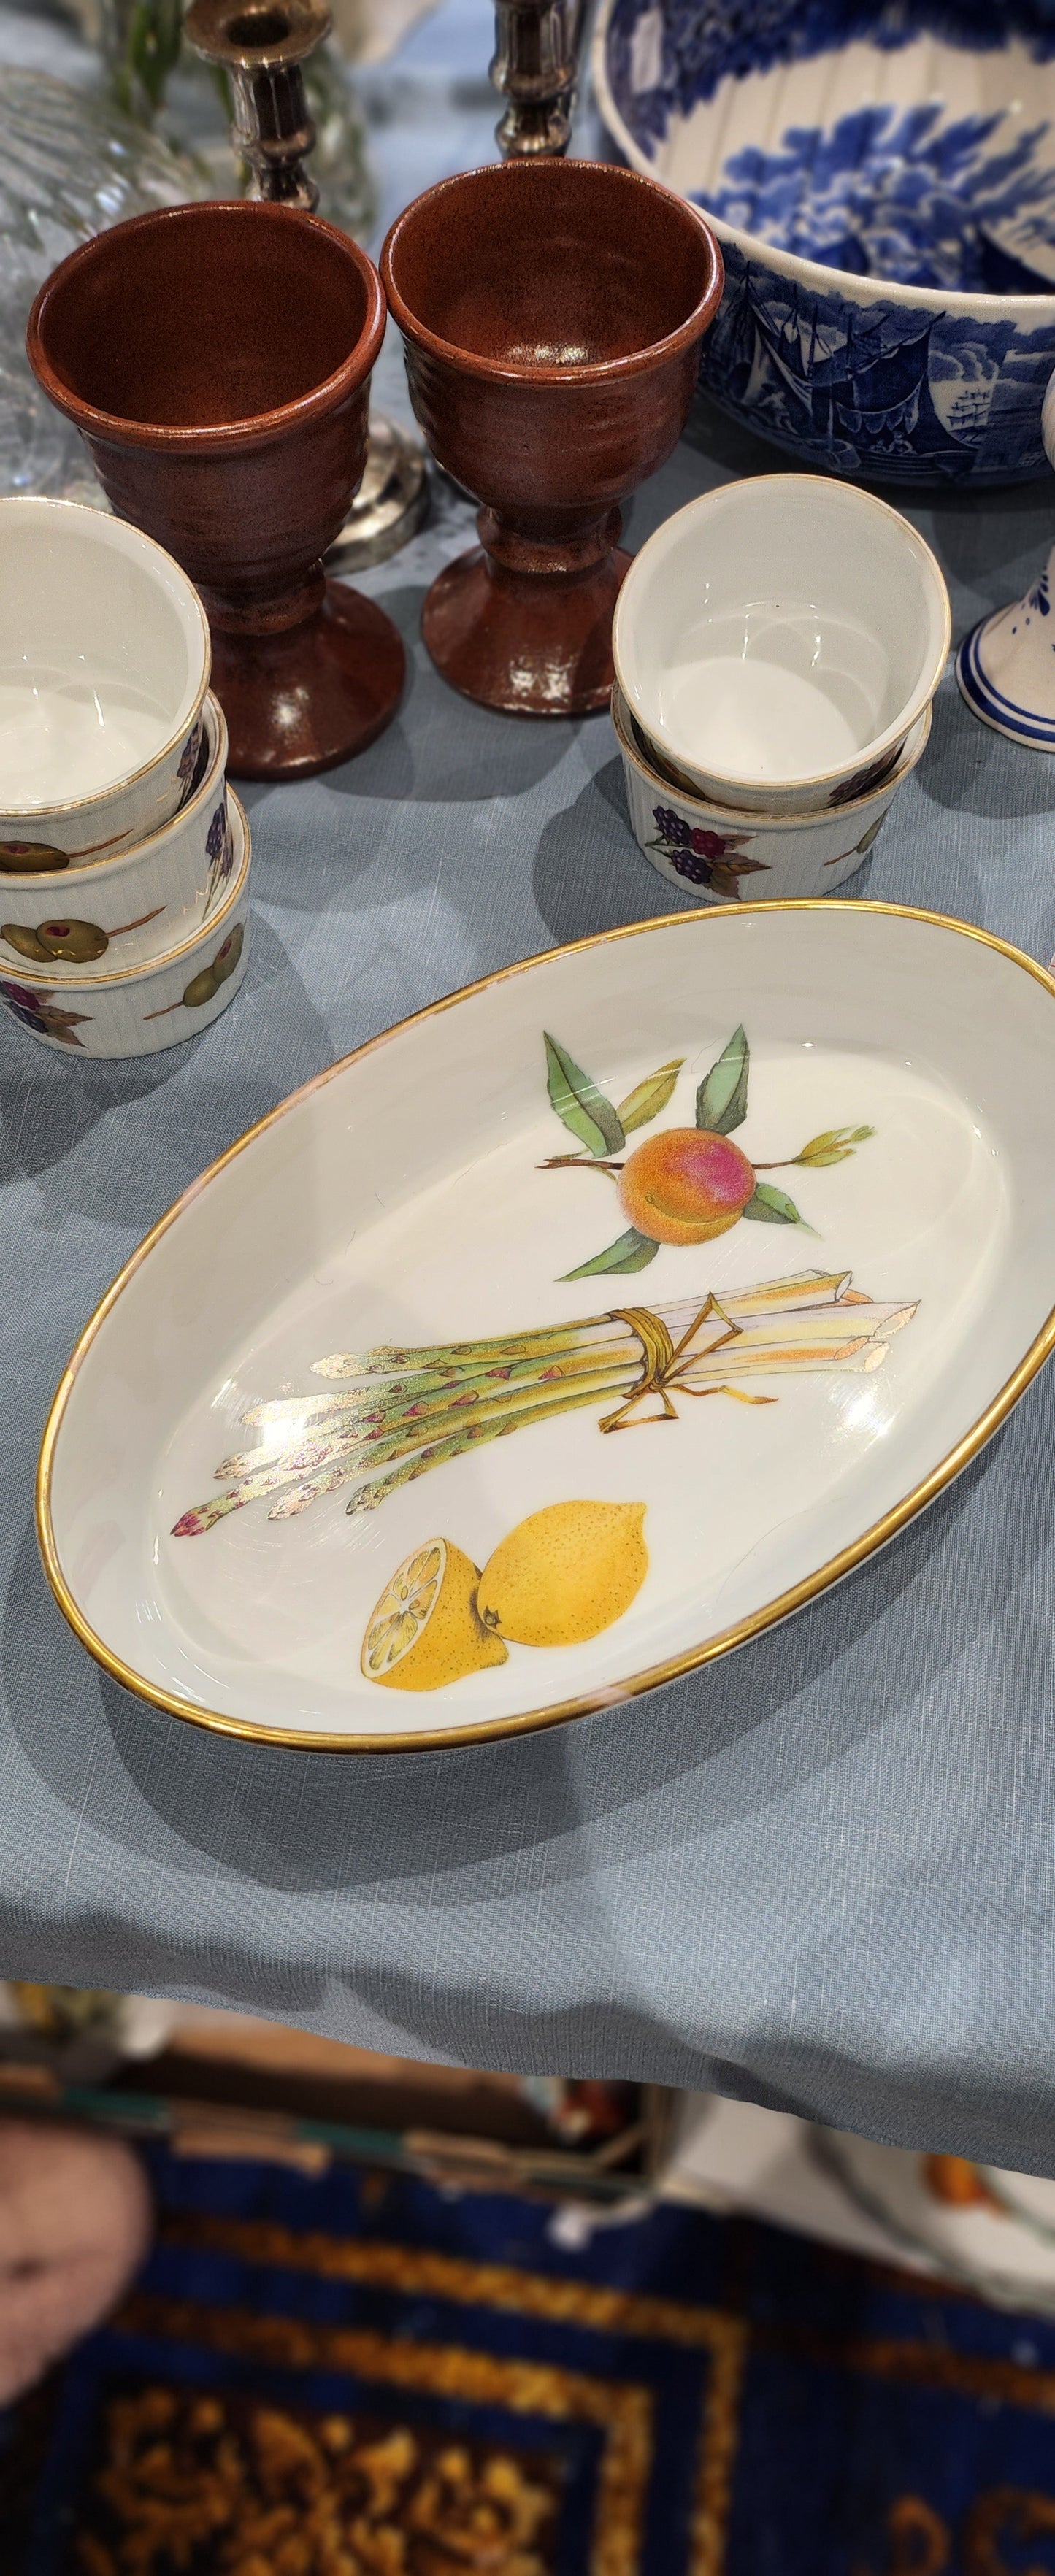 Royal Worcester Oven to tableware serving dish - Asparagus